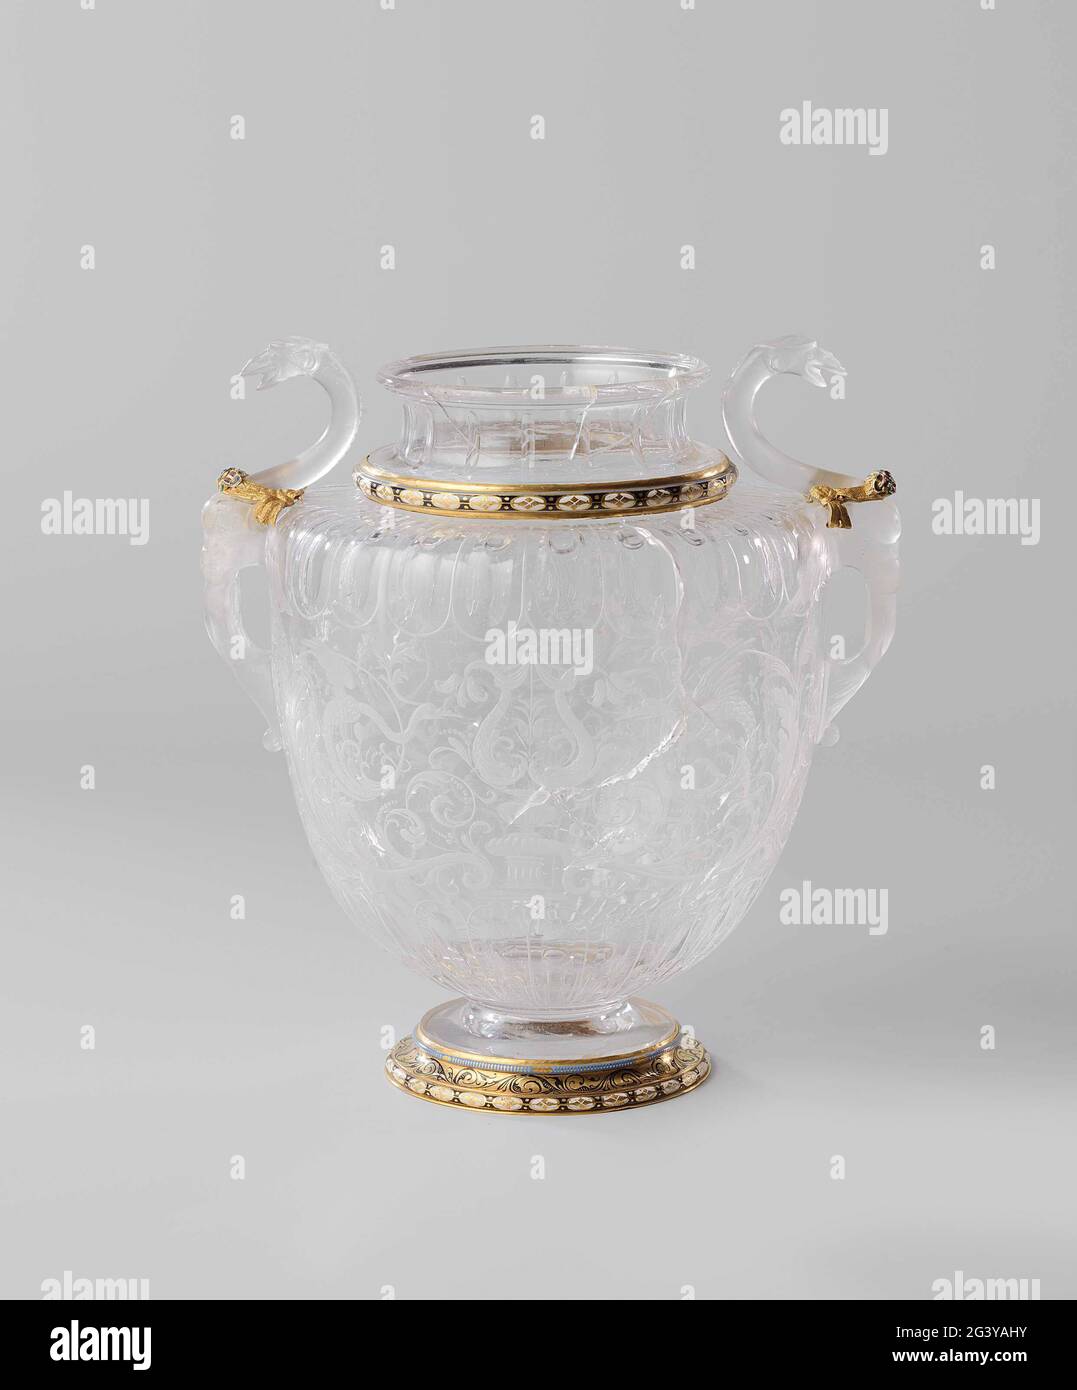 Vase. The wall of this vase is decorated with foliate scrolls incorporating imaginary creatures such as dragons. The theme is continued in the handles, which are shaped like griffins. The decoration alludes to artefacts from Classical antiquity that were excavated around 1520. Stock Photo